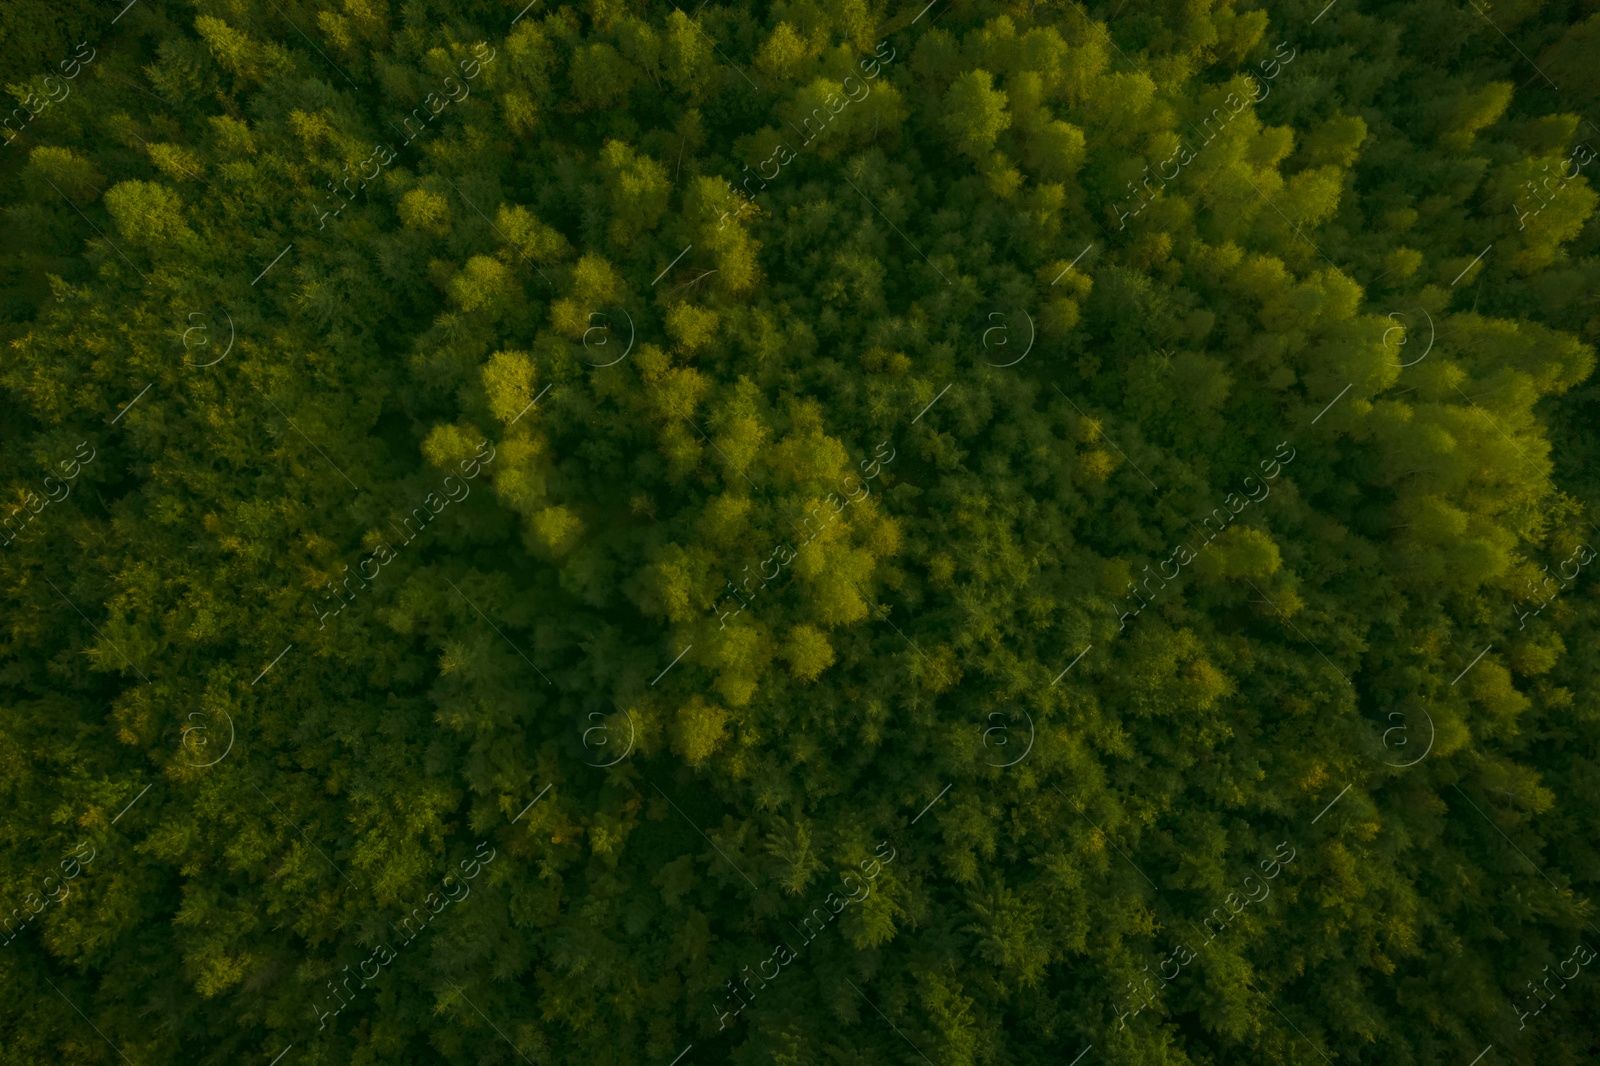 Image of Aerial view of forest with beautiful green trees